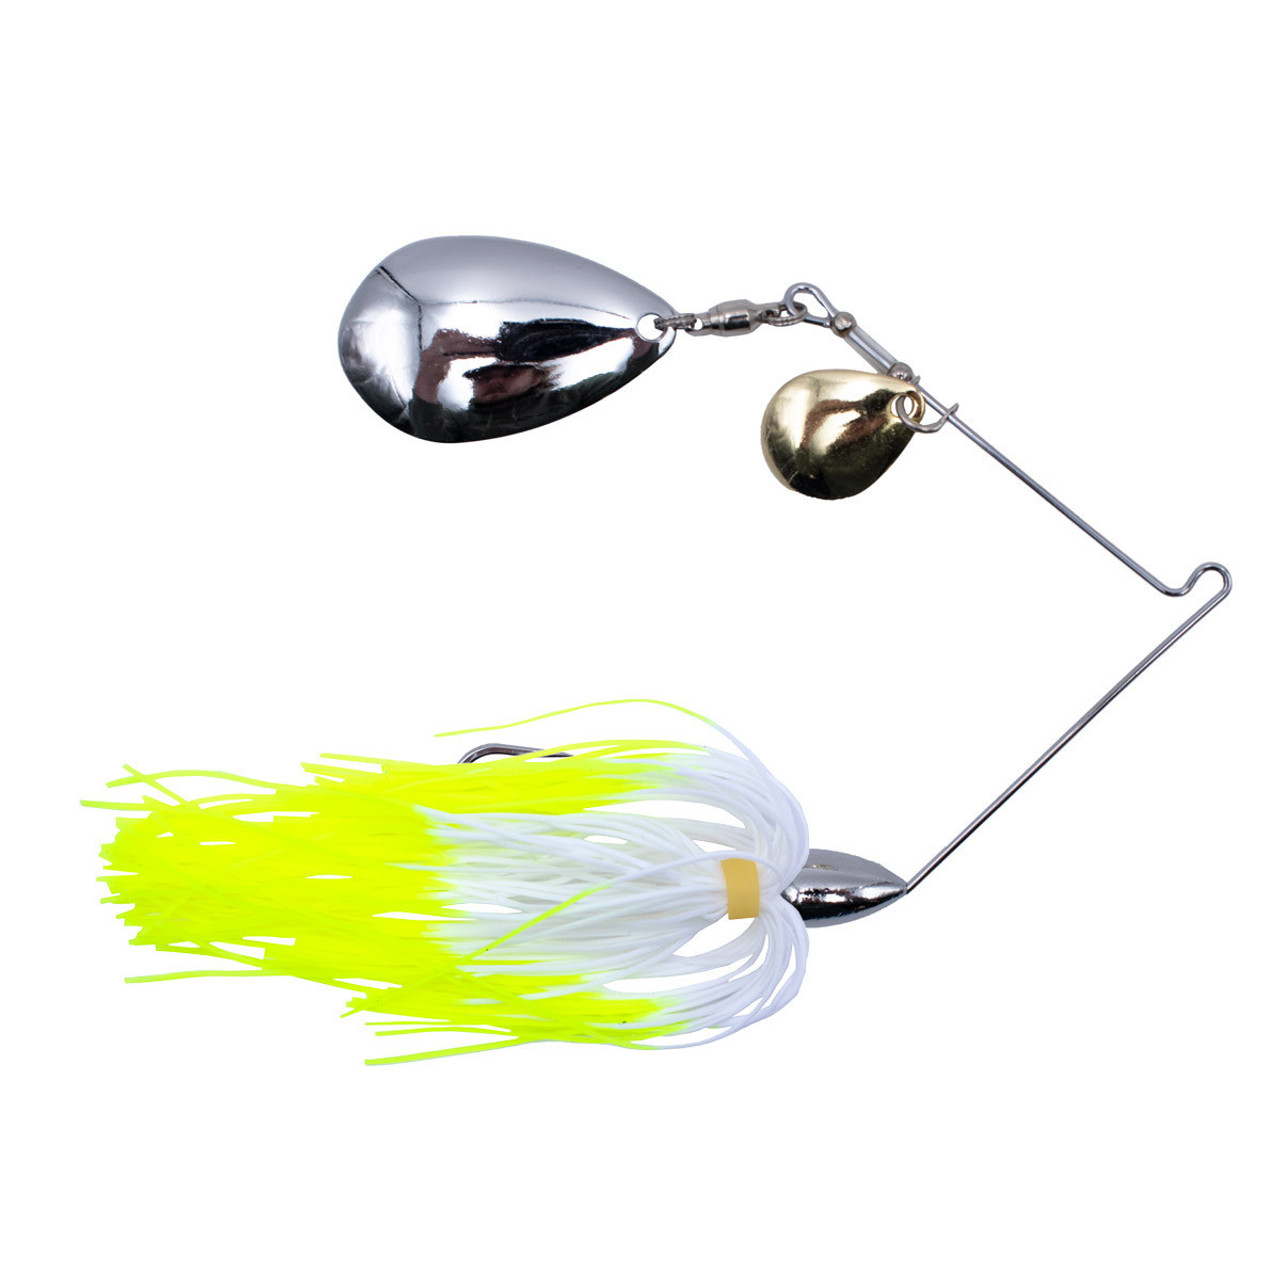 Rogers Sporting Goods Go-2 Spinnerbait Colorado Indy in Chartreuse Size 3/8 oz